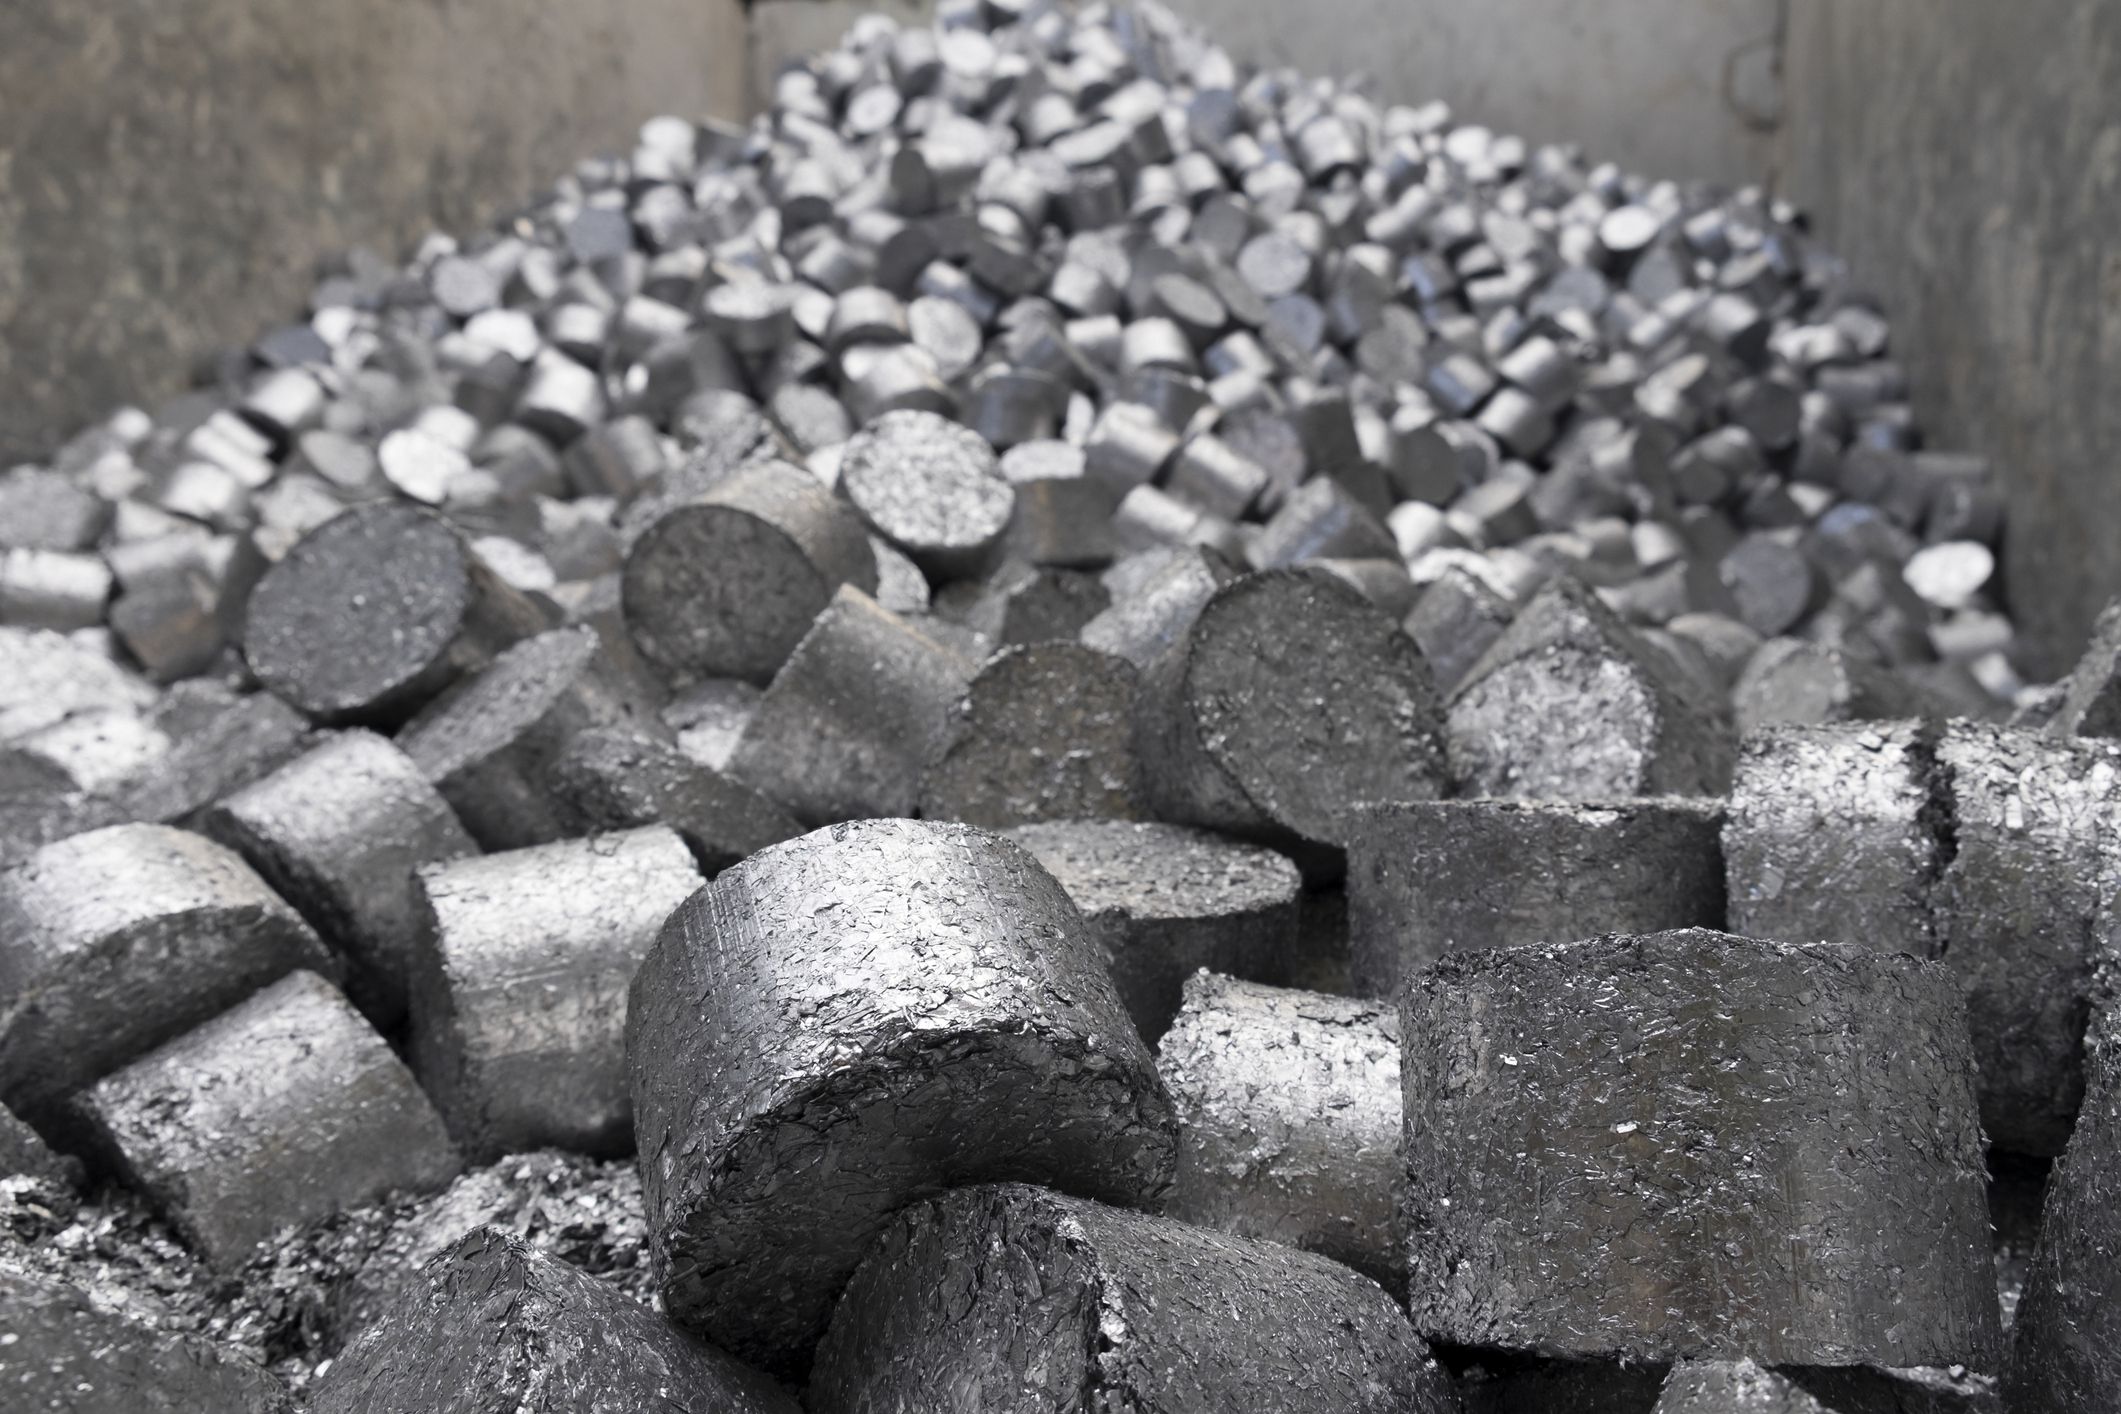 Malaysian construction industry demand for aluminum continues to improve